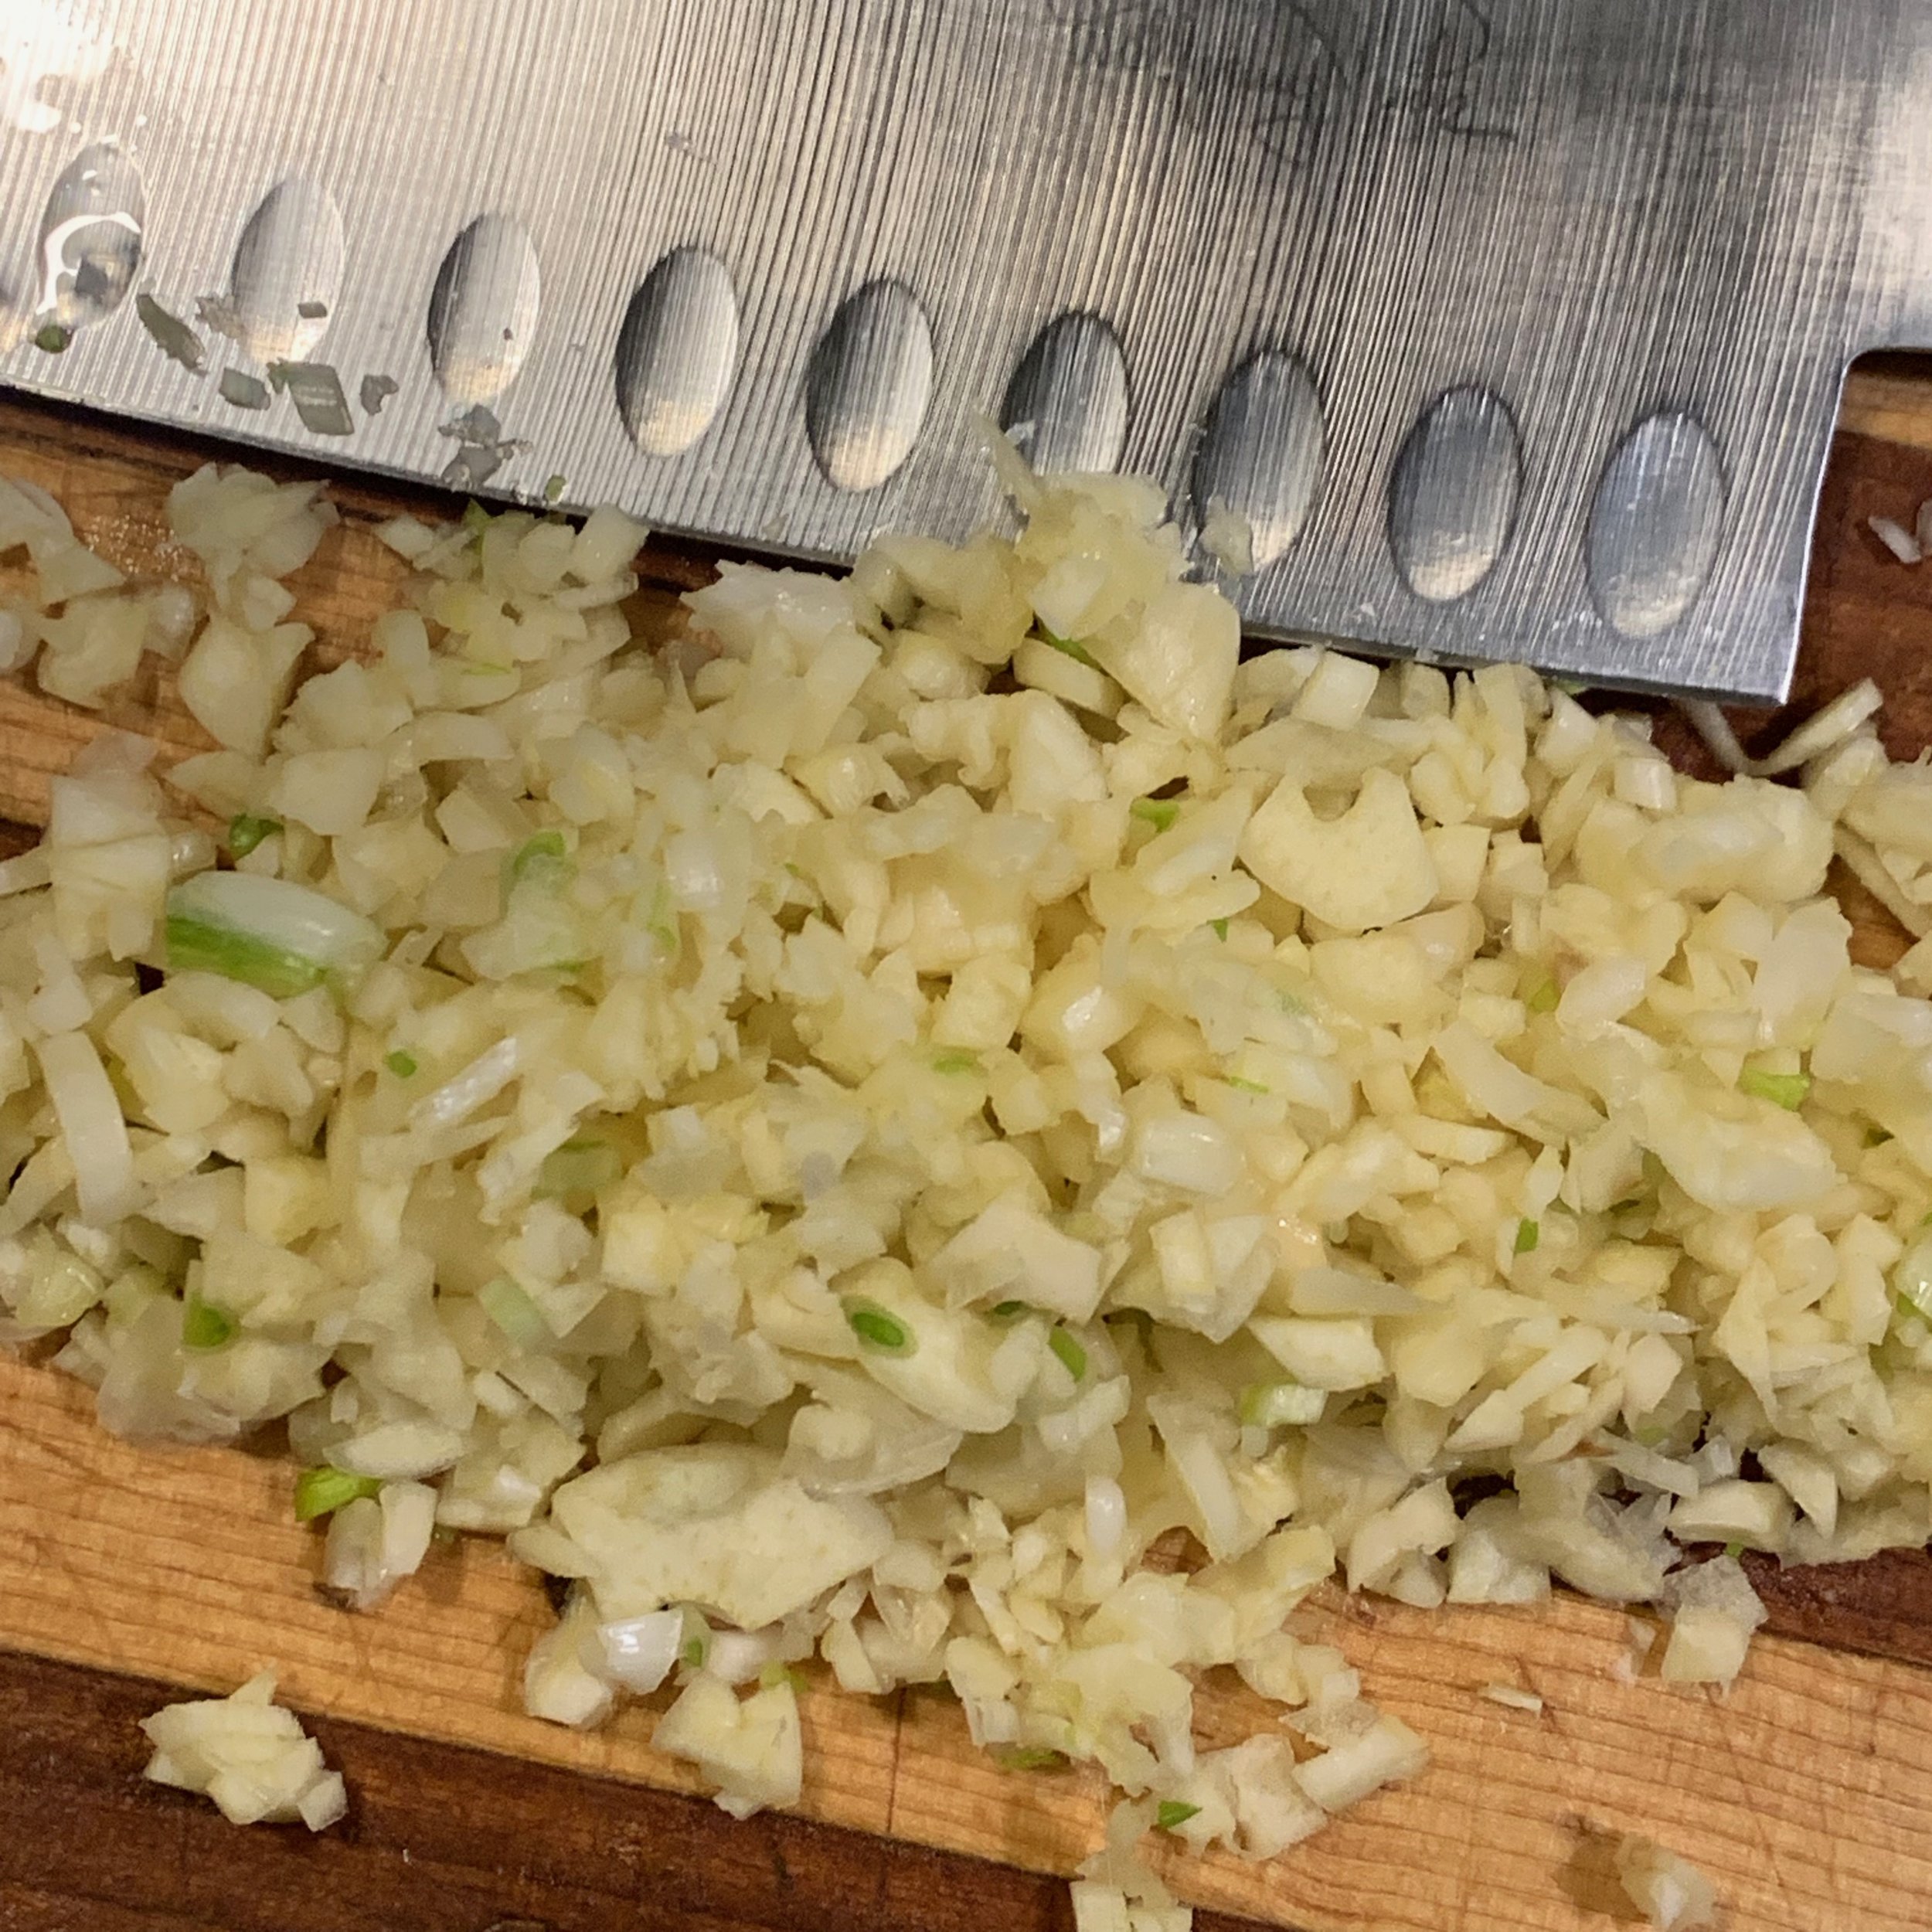 chopping or pressing garlic releases its anti-bacterial properties